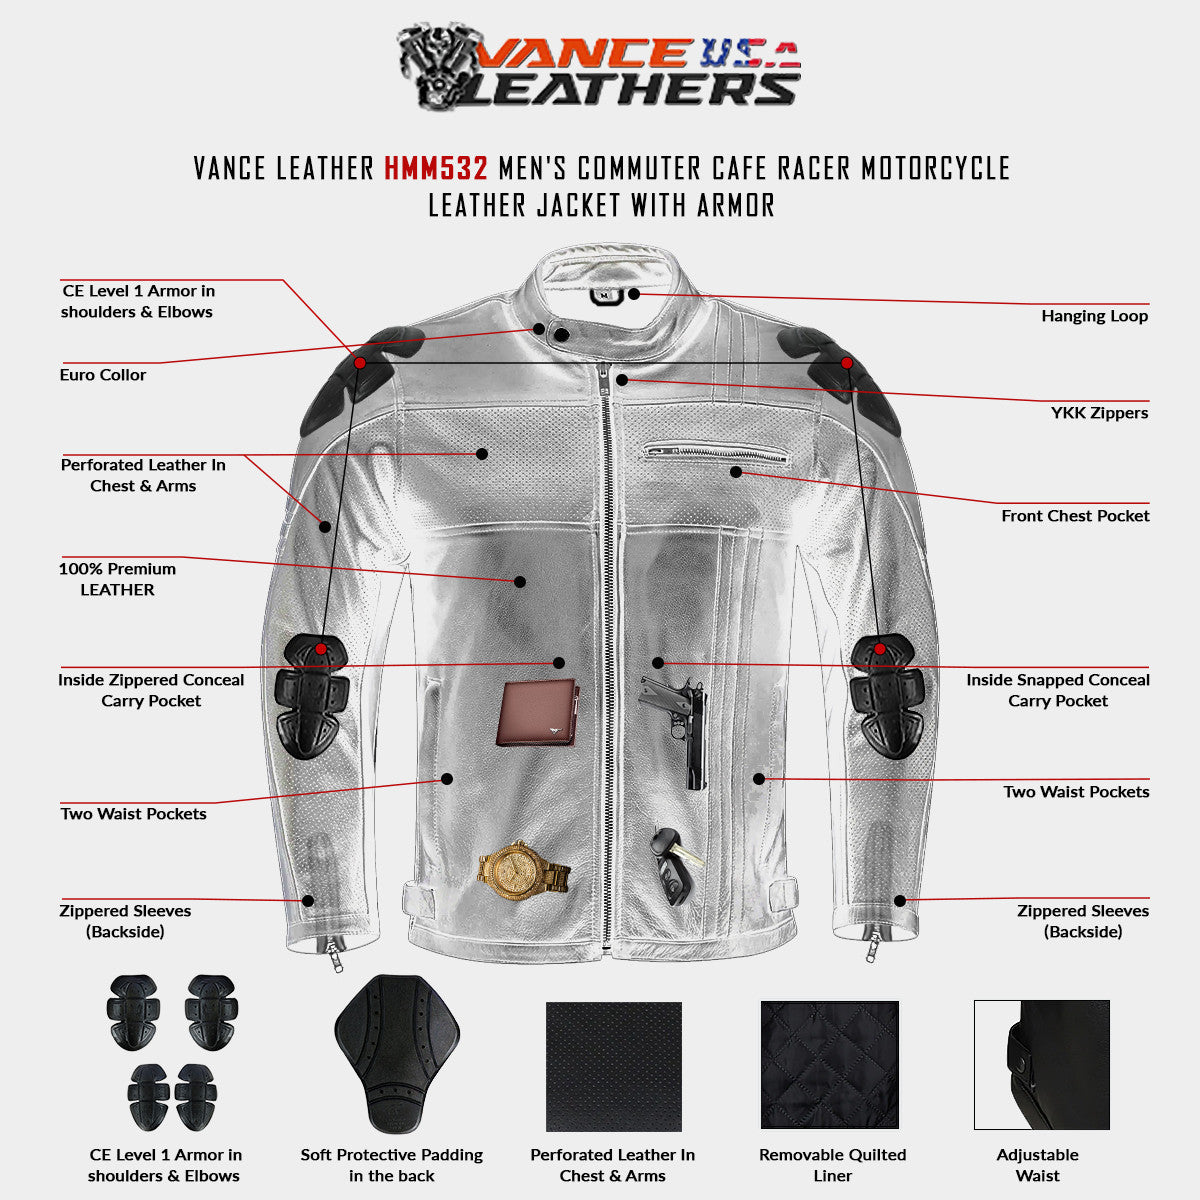 Vance Leather HMM532 Men's Commuter Cafe Racer Motorcycle Leather Jacket with Armor - Infographic